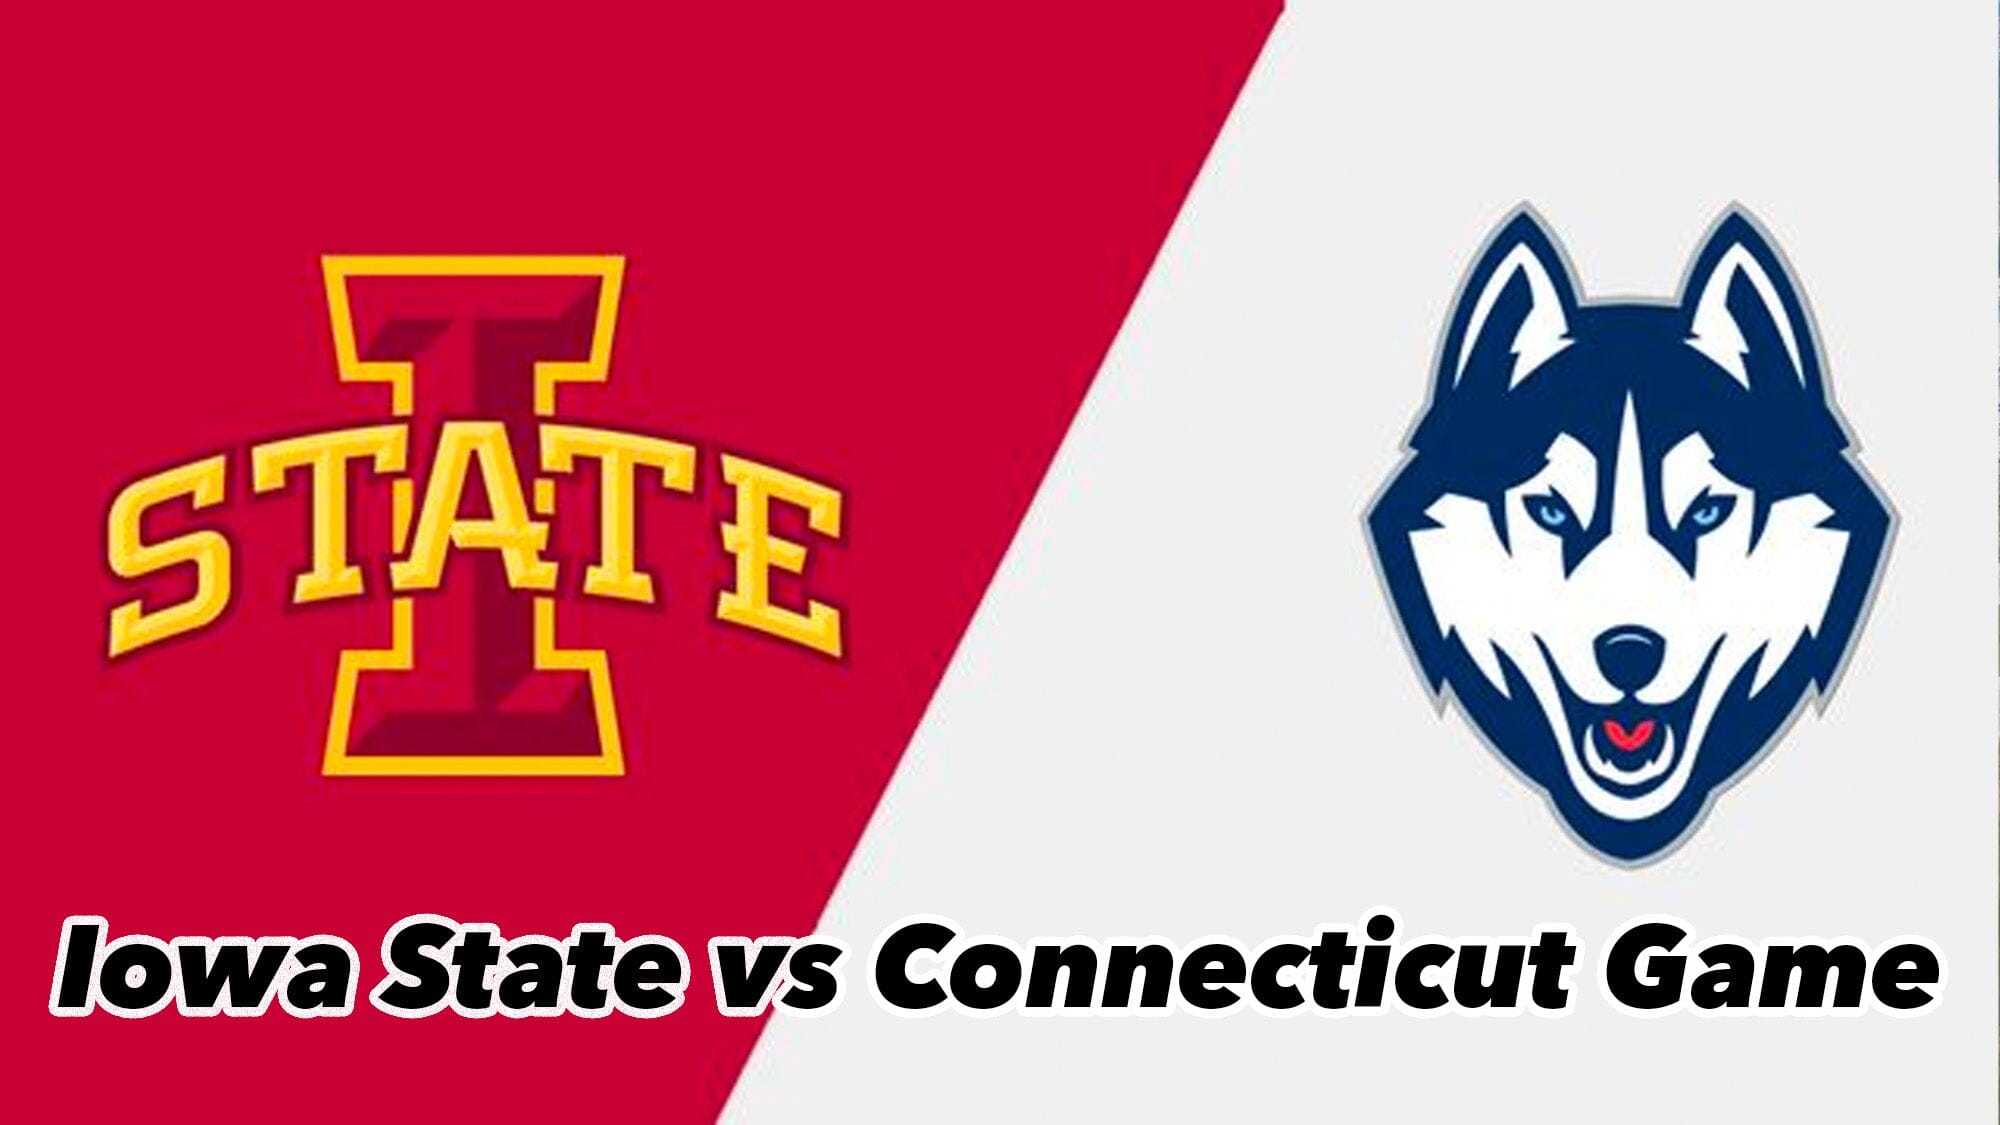 You Won't Believe the Outcome of the Iowa State vs Connecticut Game: Don't Miss the Action!